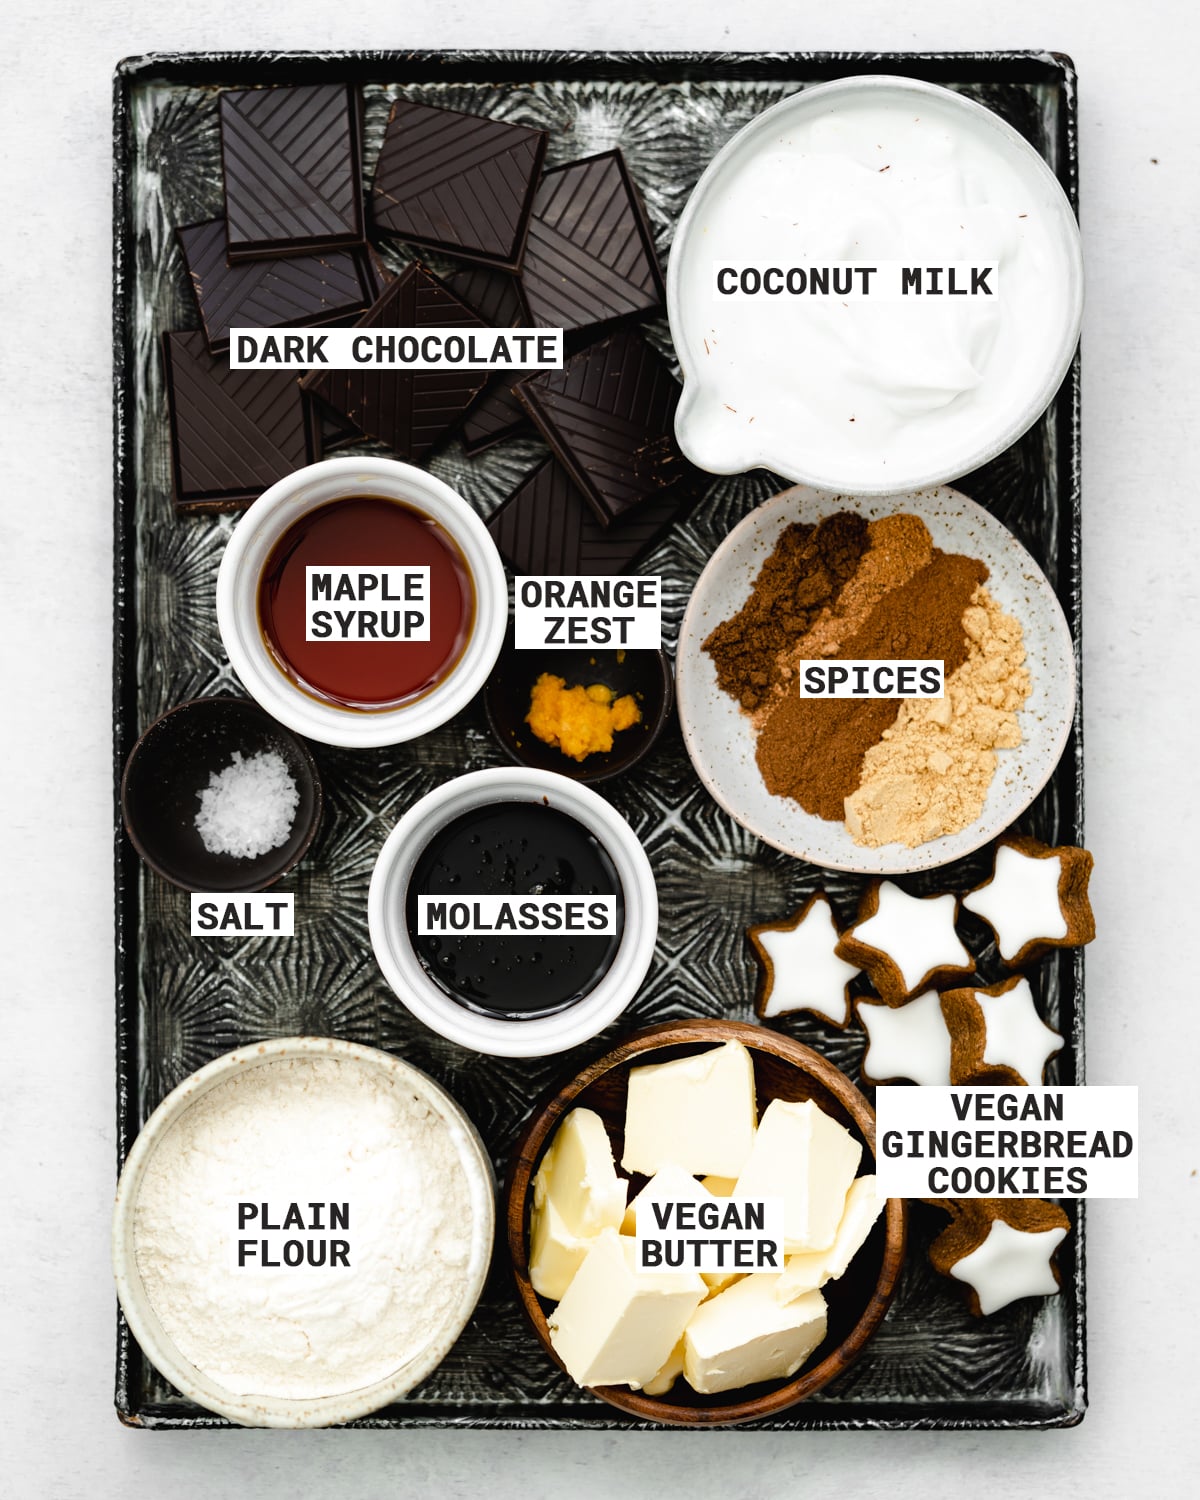 tray of ingredients to make a vegan chocolate tart with gingerbread crust.